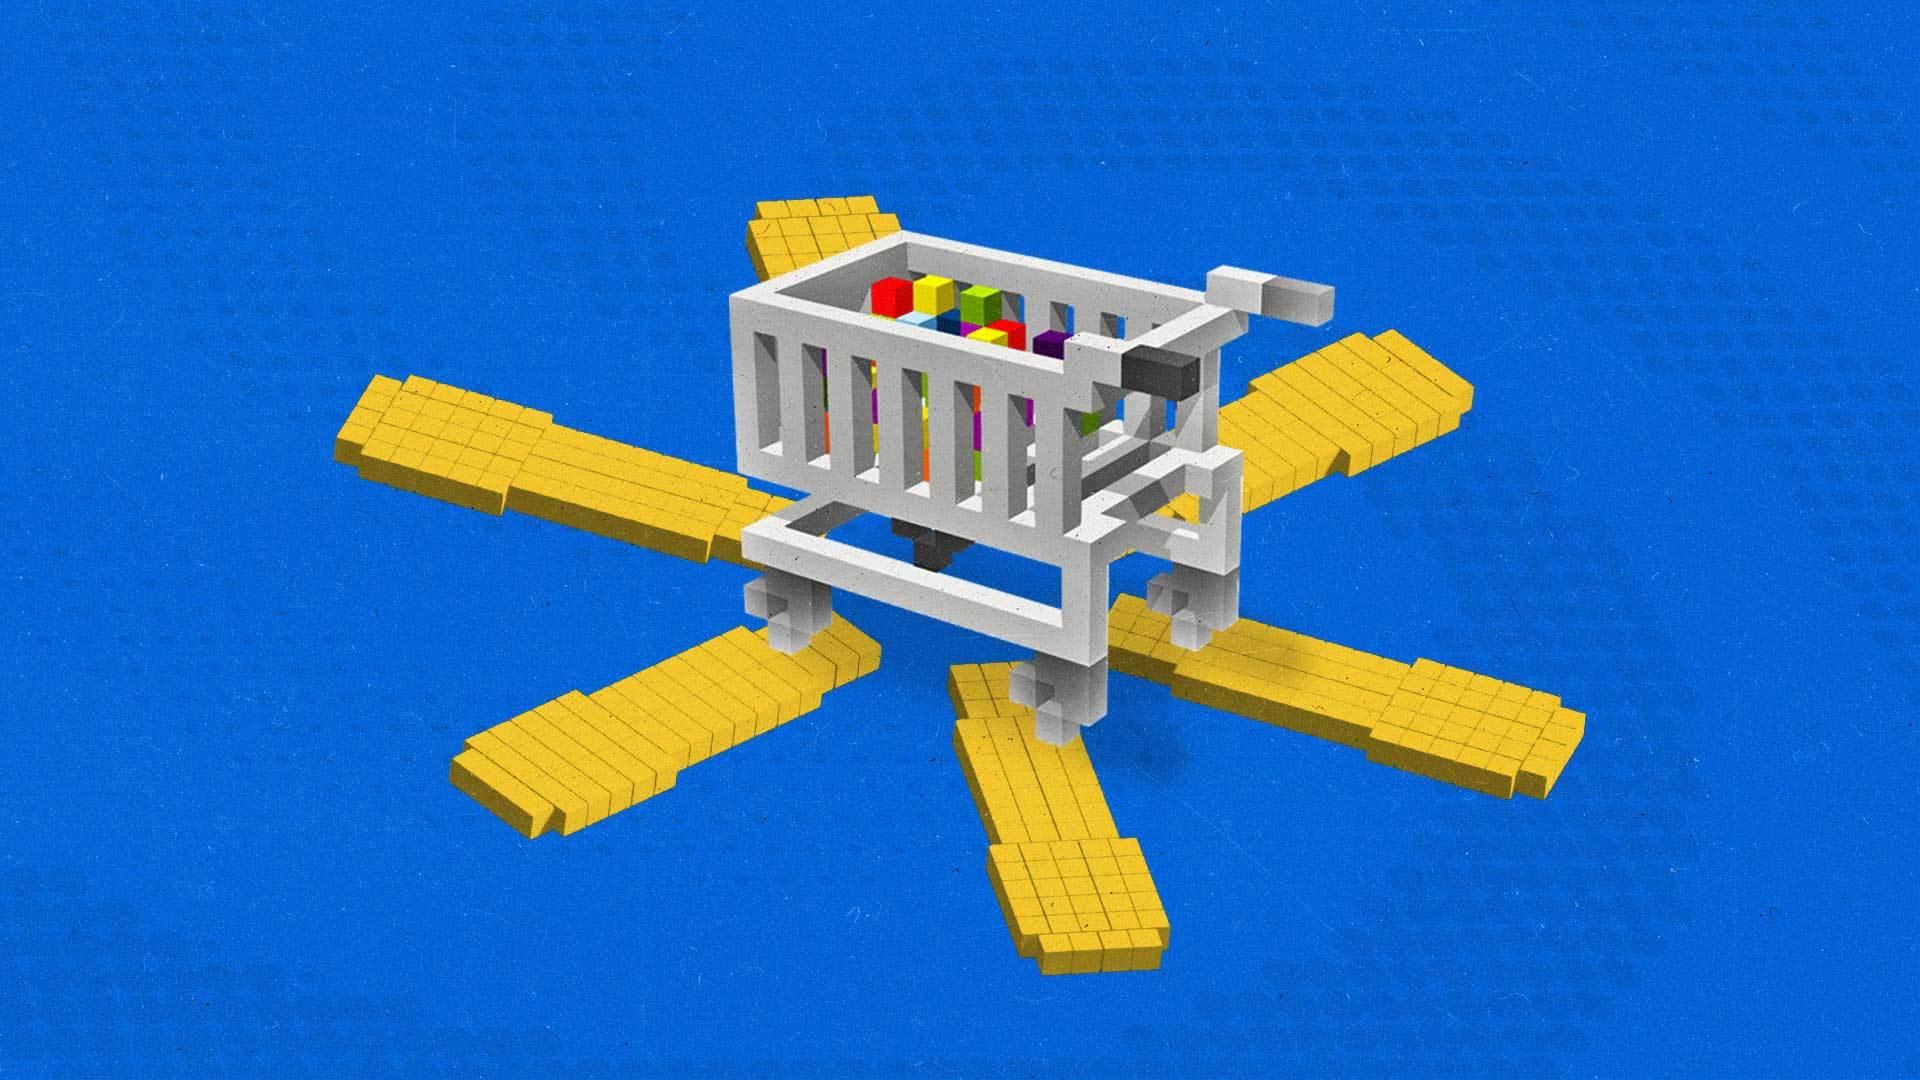 A 3D pixel shopping cart filled with multicolored block sits atop a pixelated starburst.